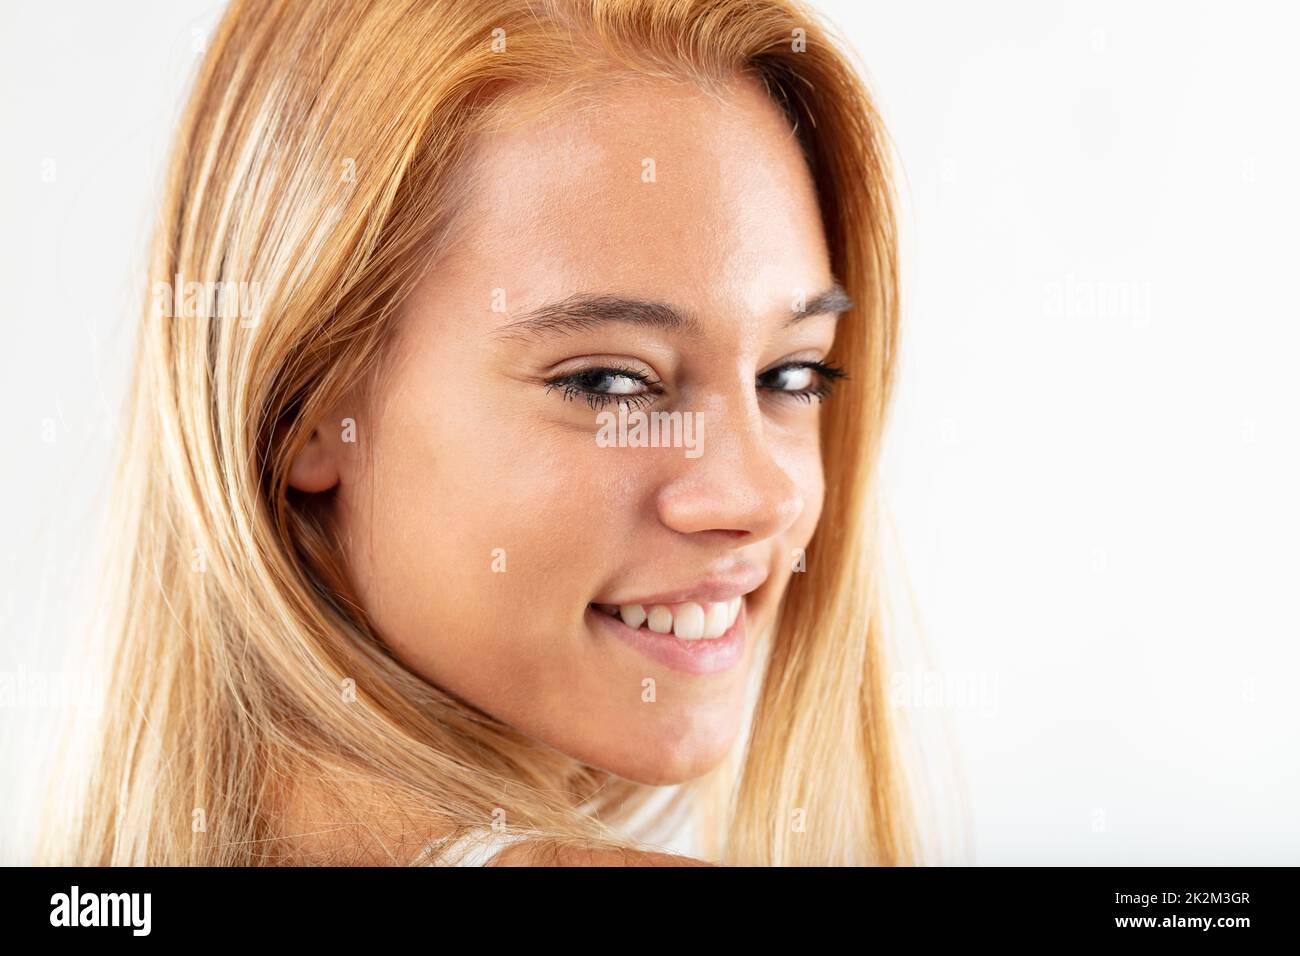 Happy friendly young woman with a lovely smile Stock Photo